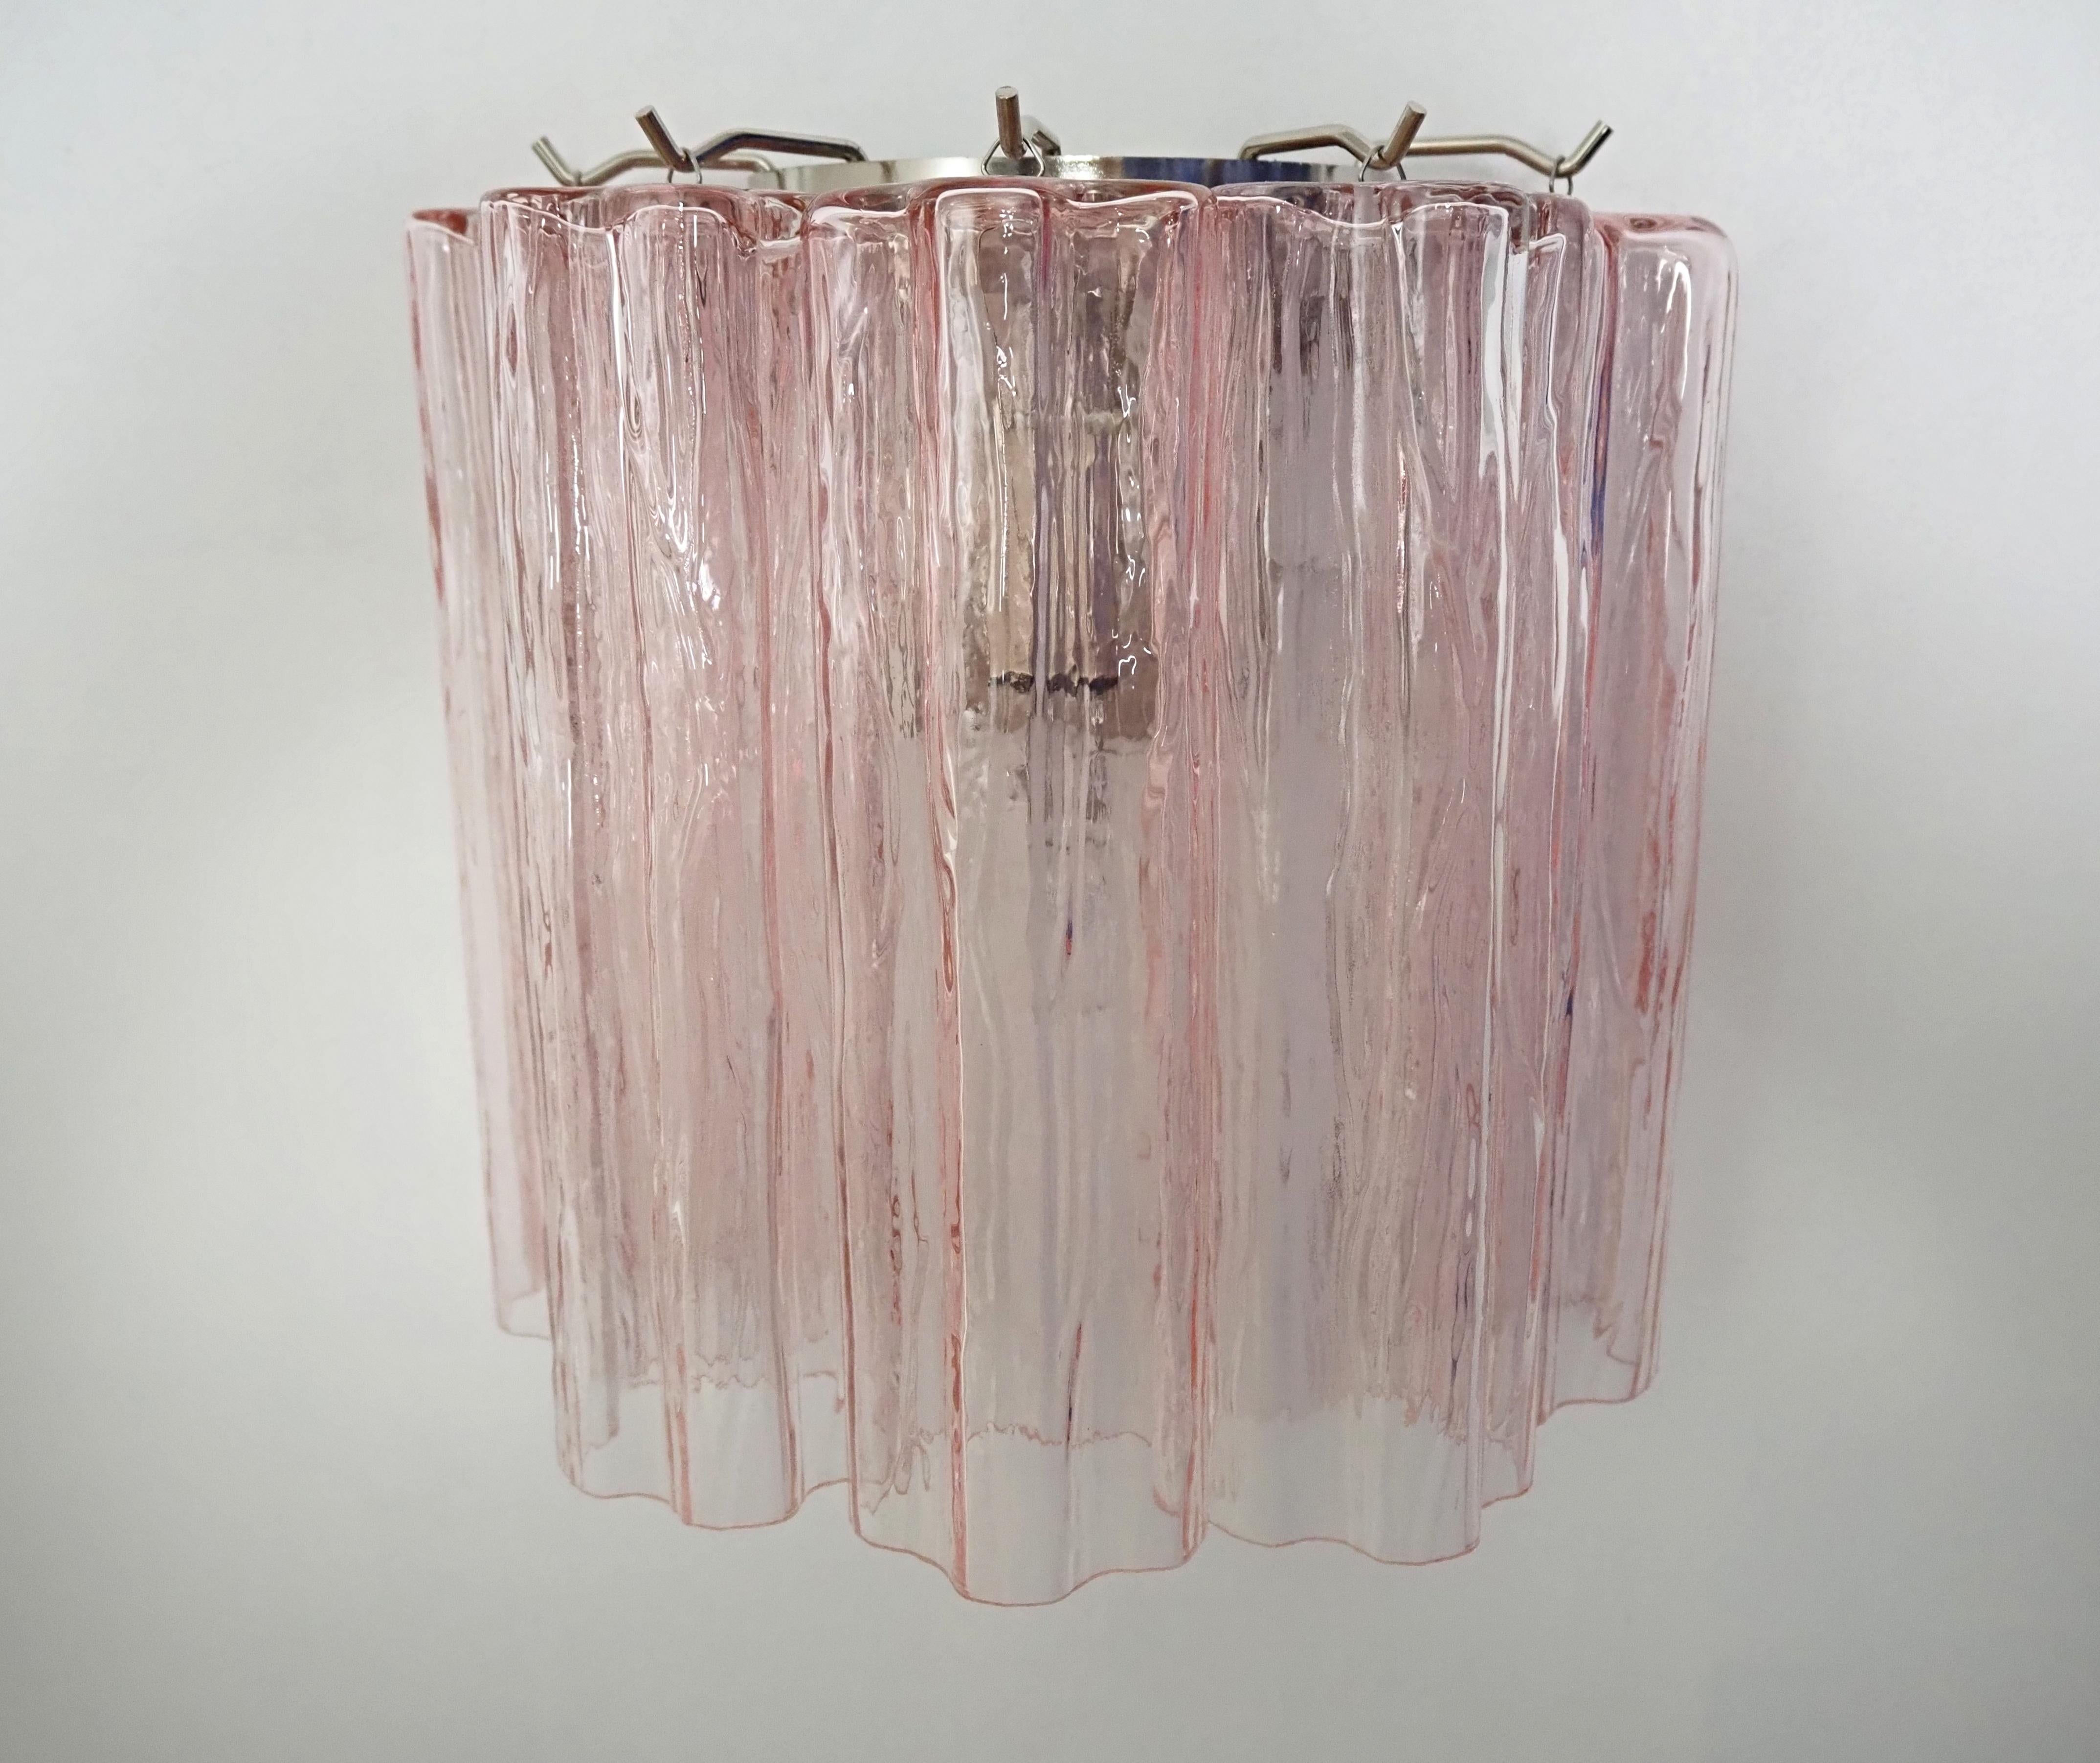 Fantastic pair of Murano Glass Tube wall sconces - 5 pink glass tube 2